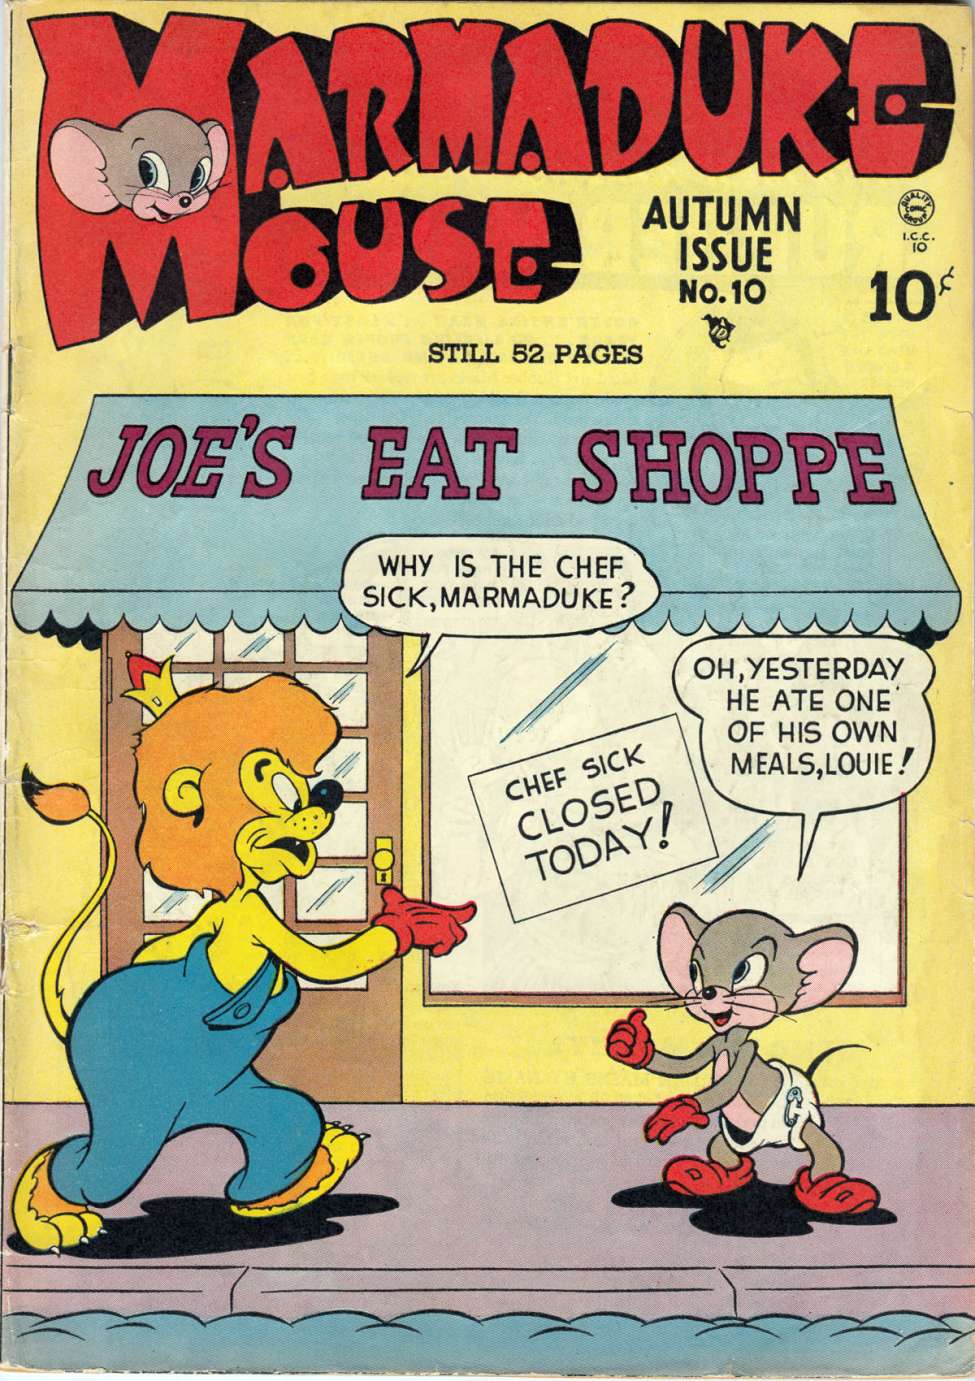 Book Cover For Marmaduke Mouse 10